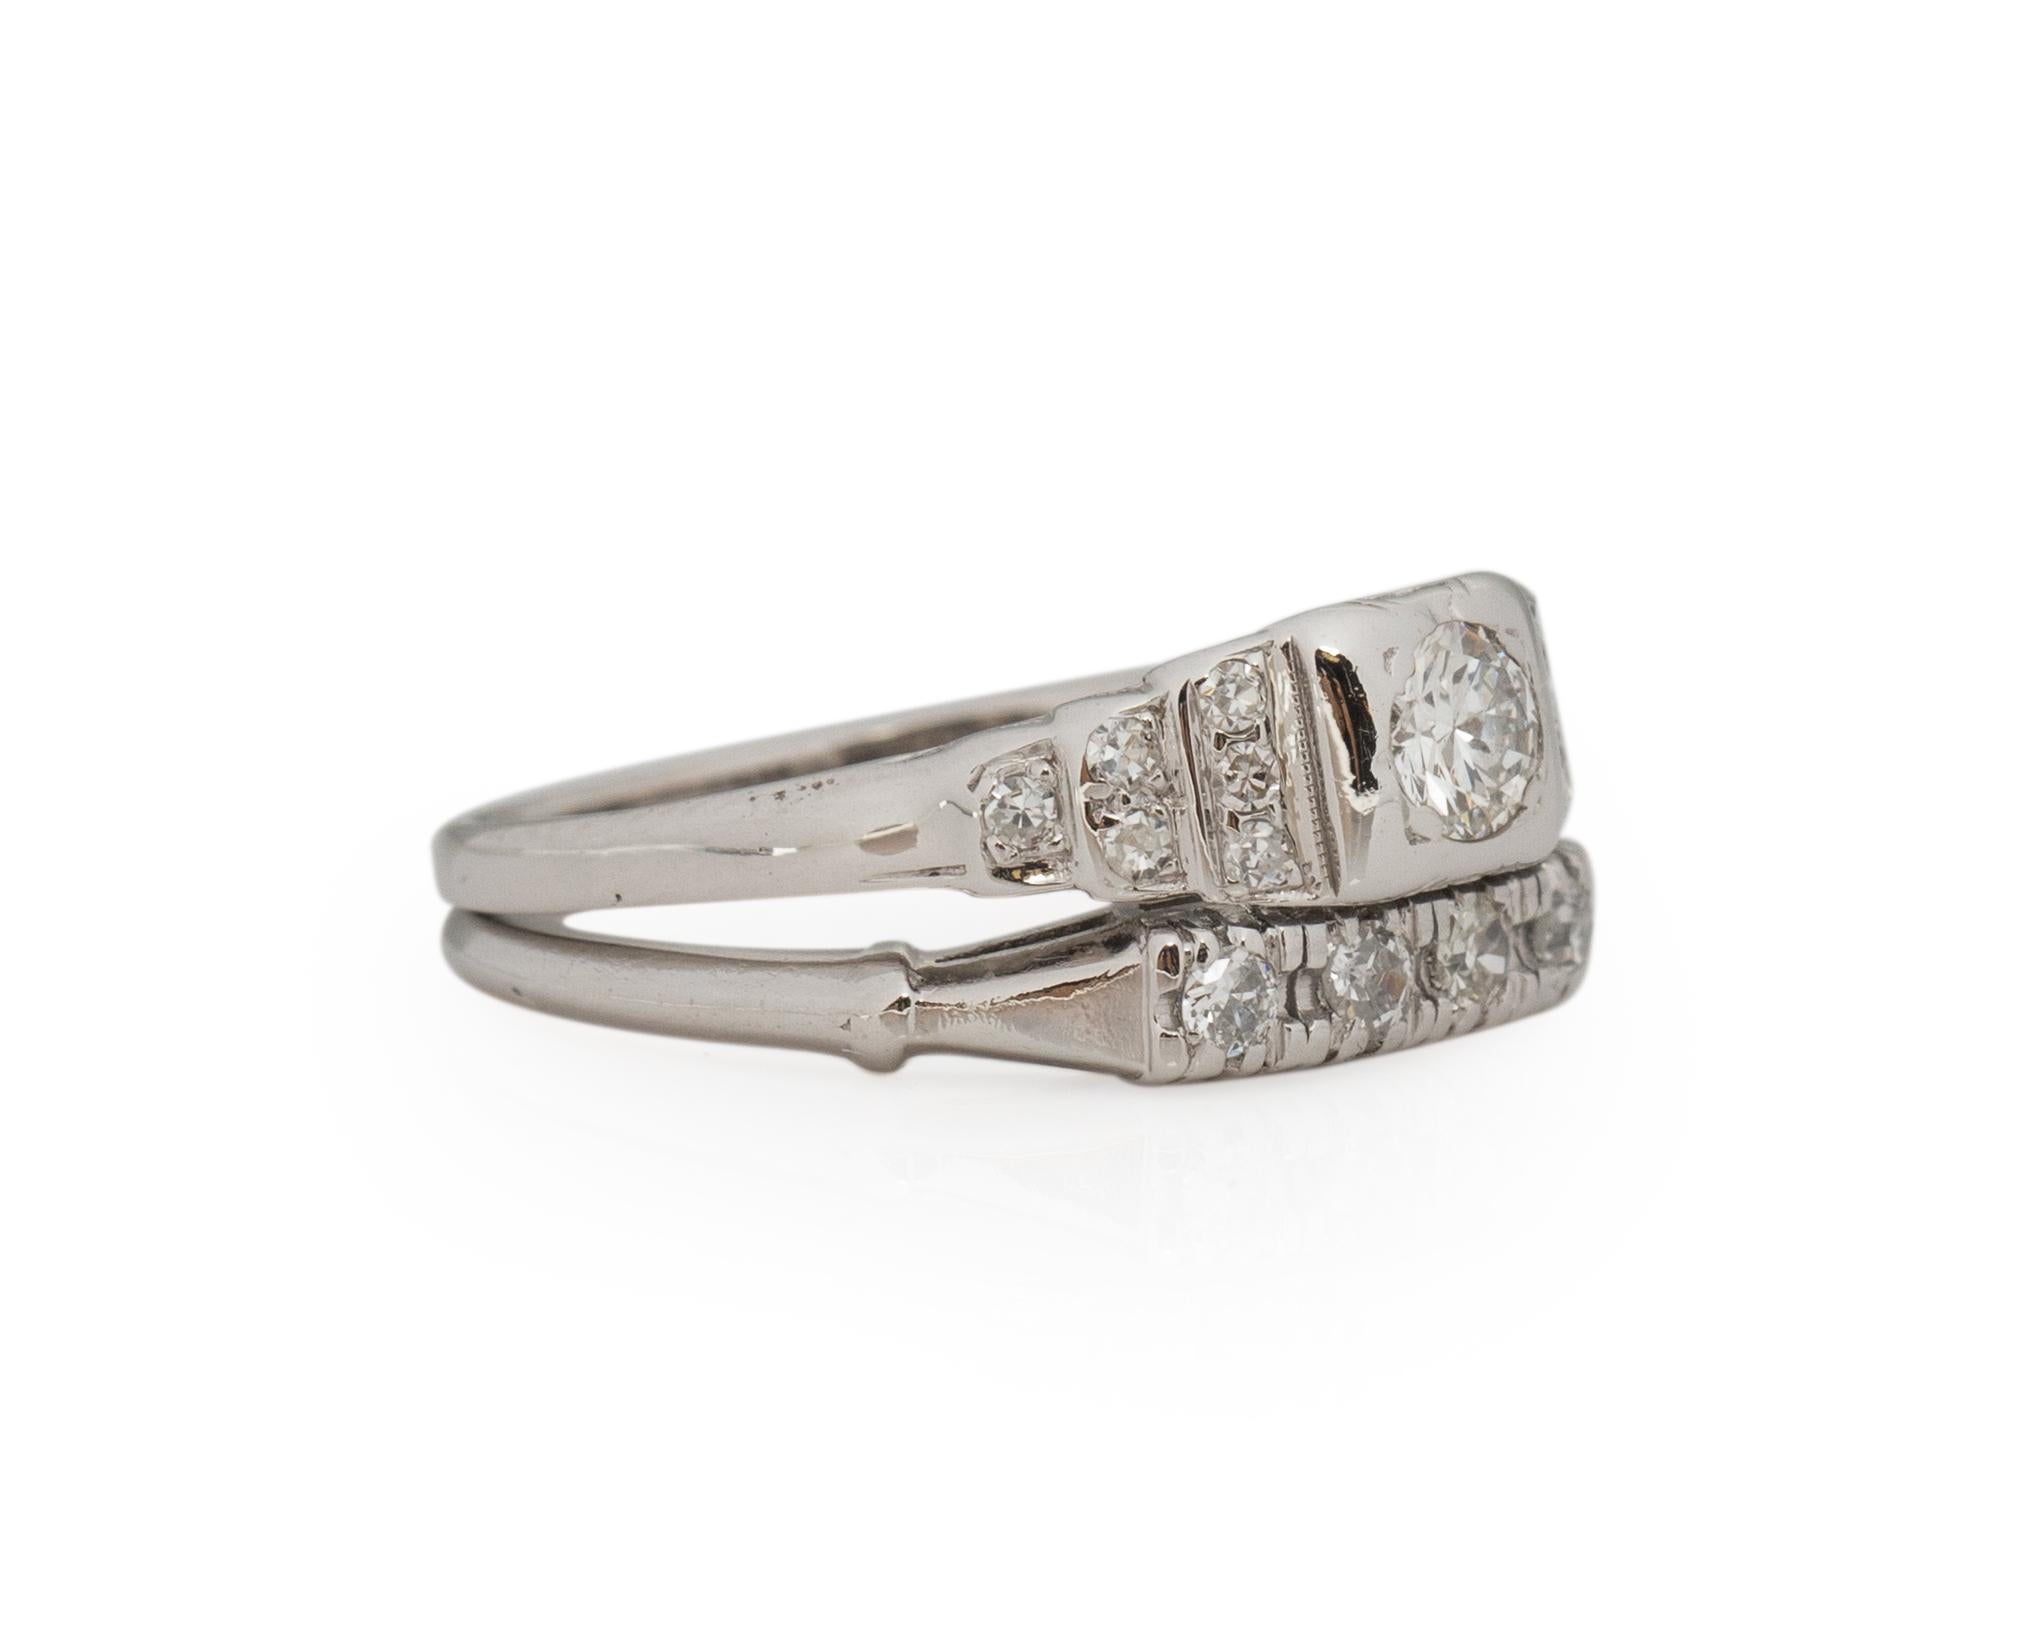 Ring Size: 6.5
Metal Type: Platinum [Hallmarked, and Tested]
Weight: 4.8 grams

Center Diamond Details:
Weight: .20ct
Cut: Old European brilliant
Color: G
Clarity: VS

Side Stone Details:
Weight: .15CT, total weight
Cut: Antique European Cut
Color: